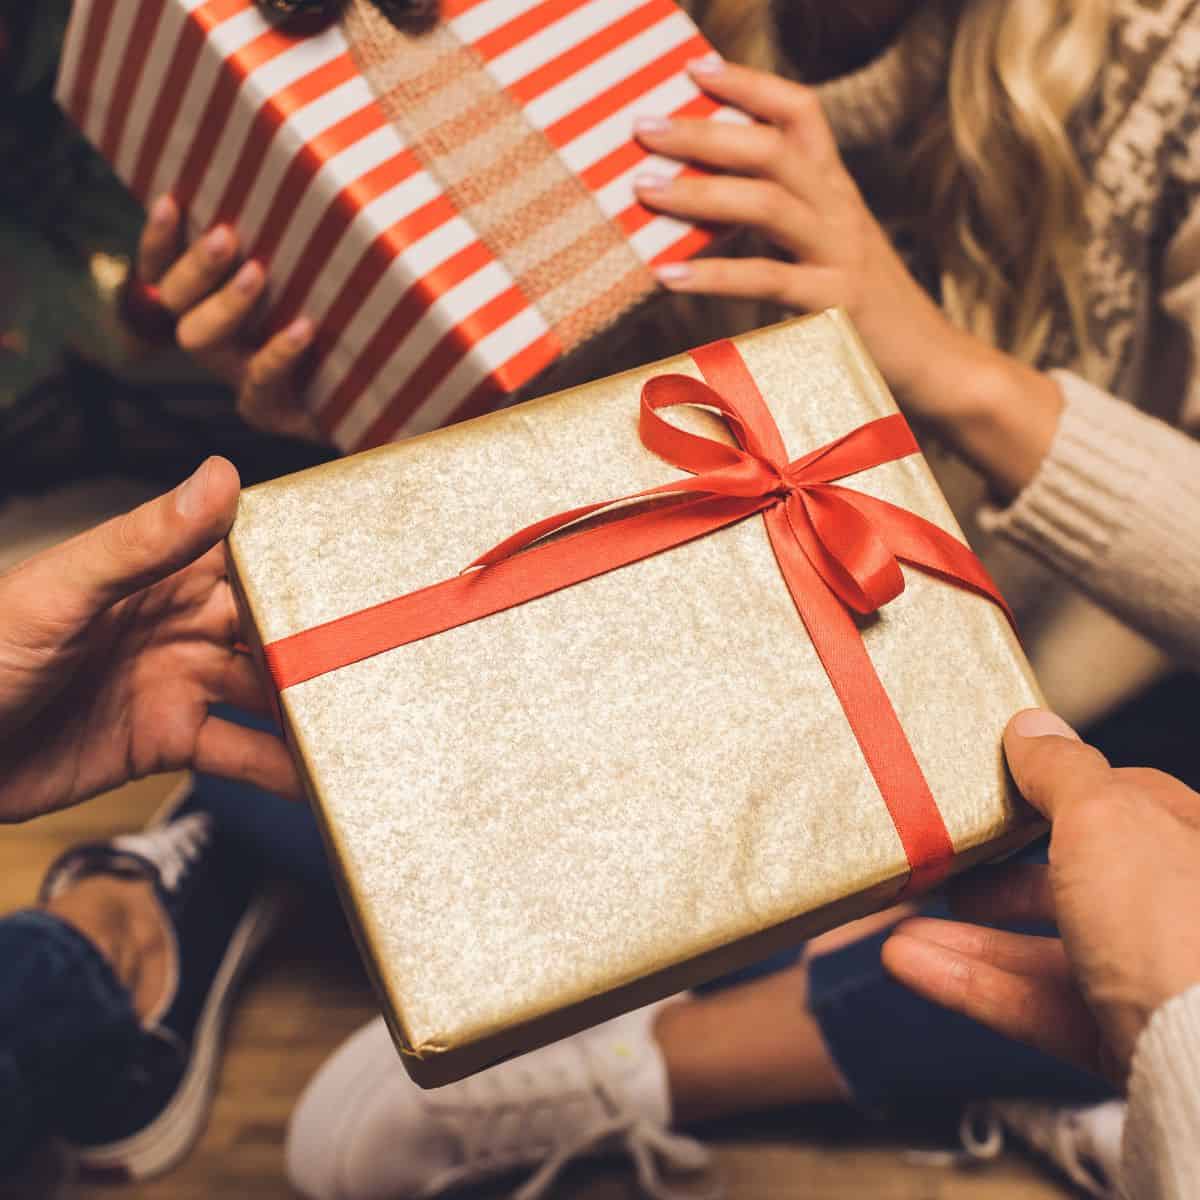 20 Traditional Gift-Giving Superstitions | Mental Floss